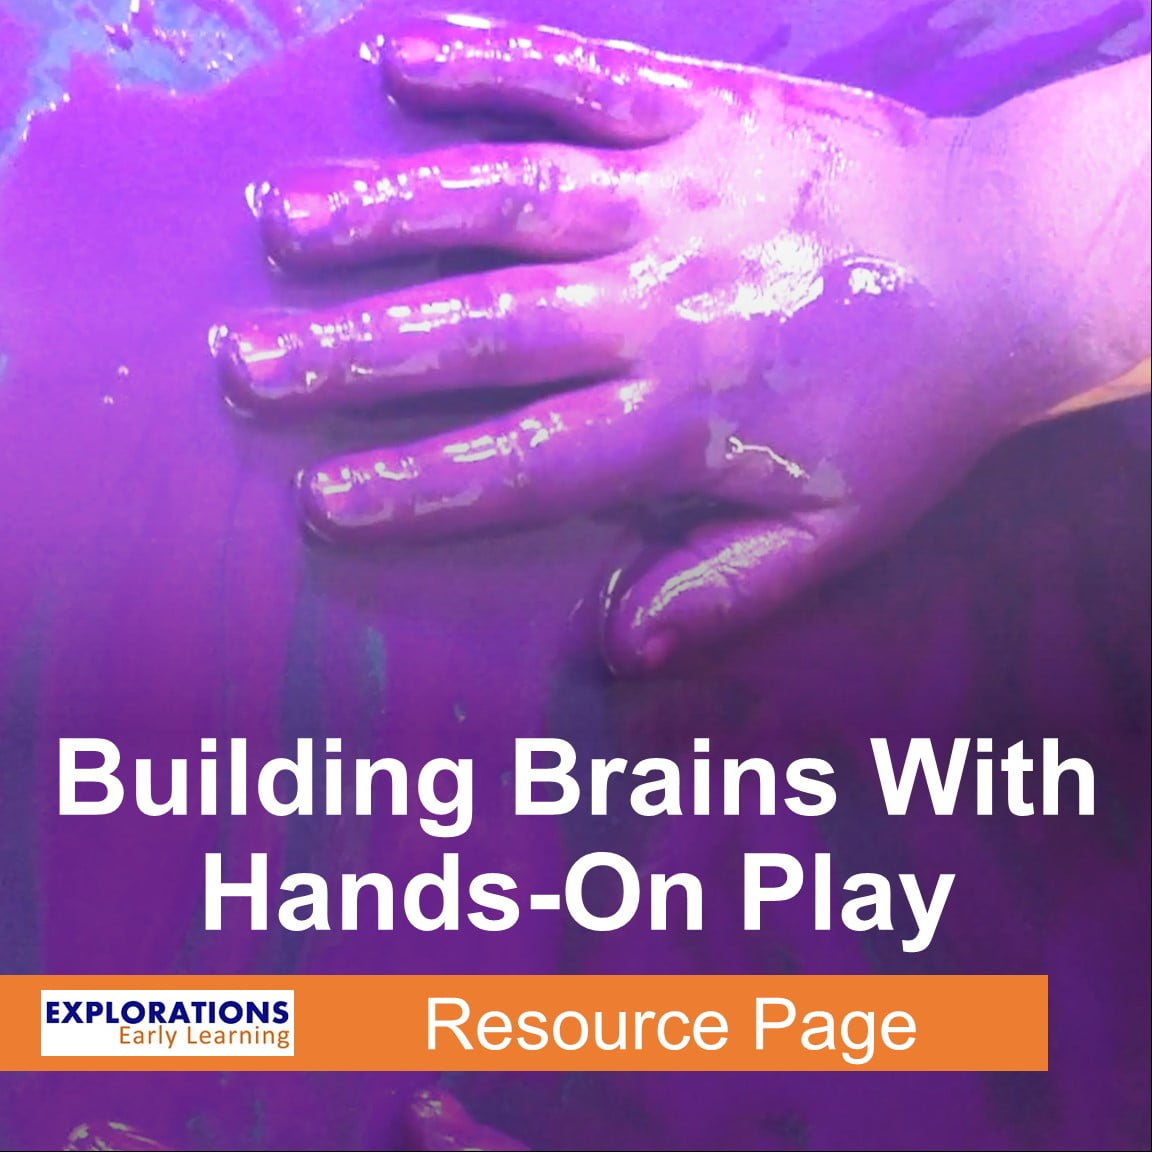 Building Brains With Hands-On Play